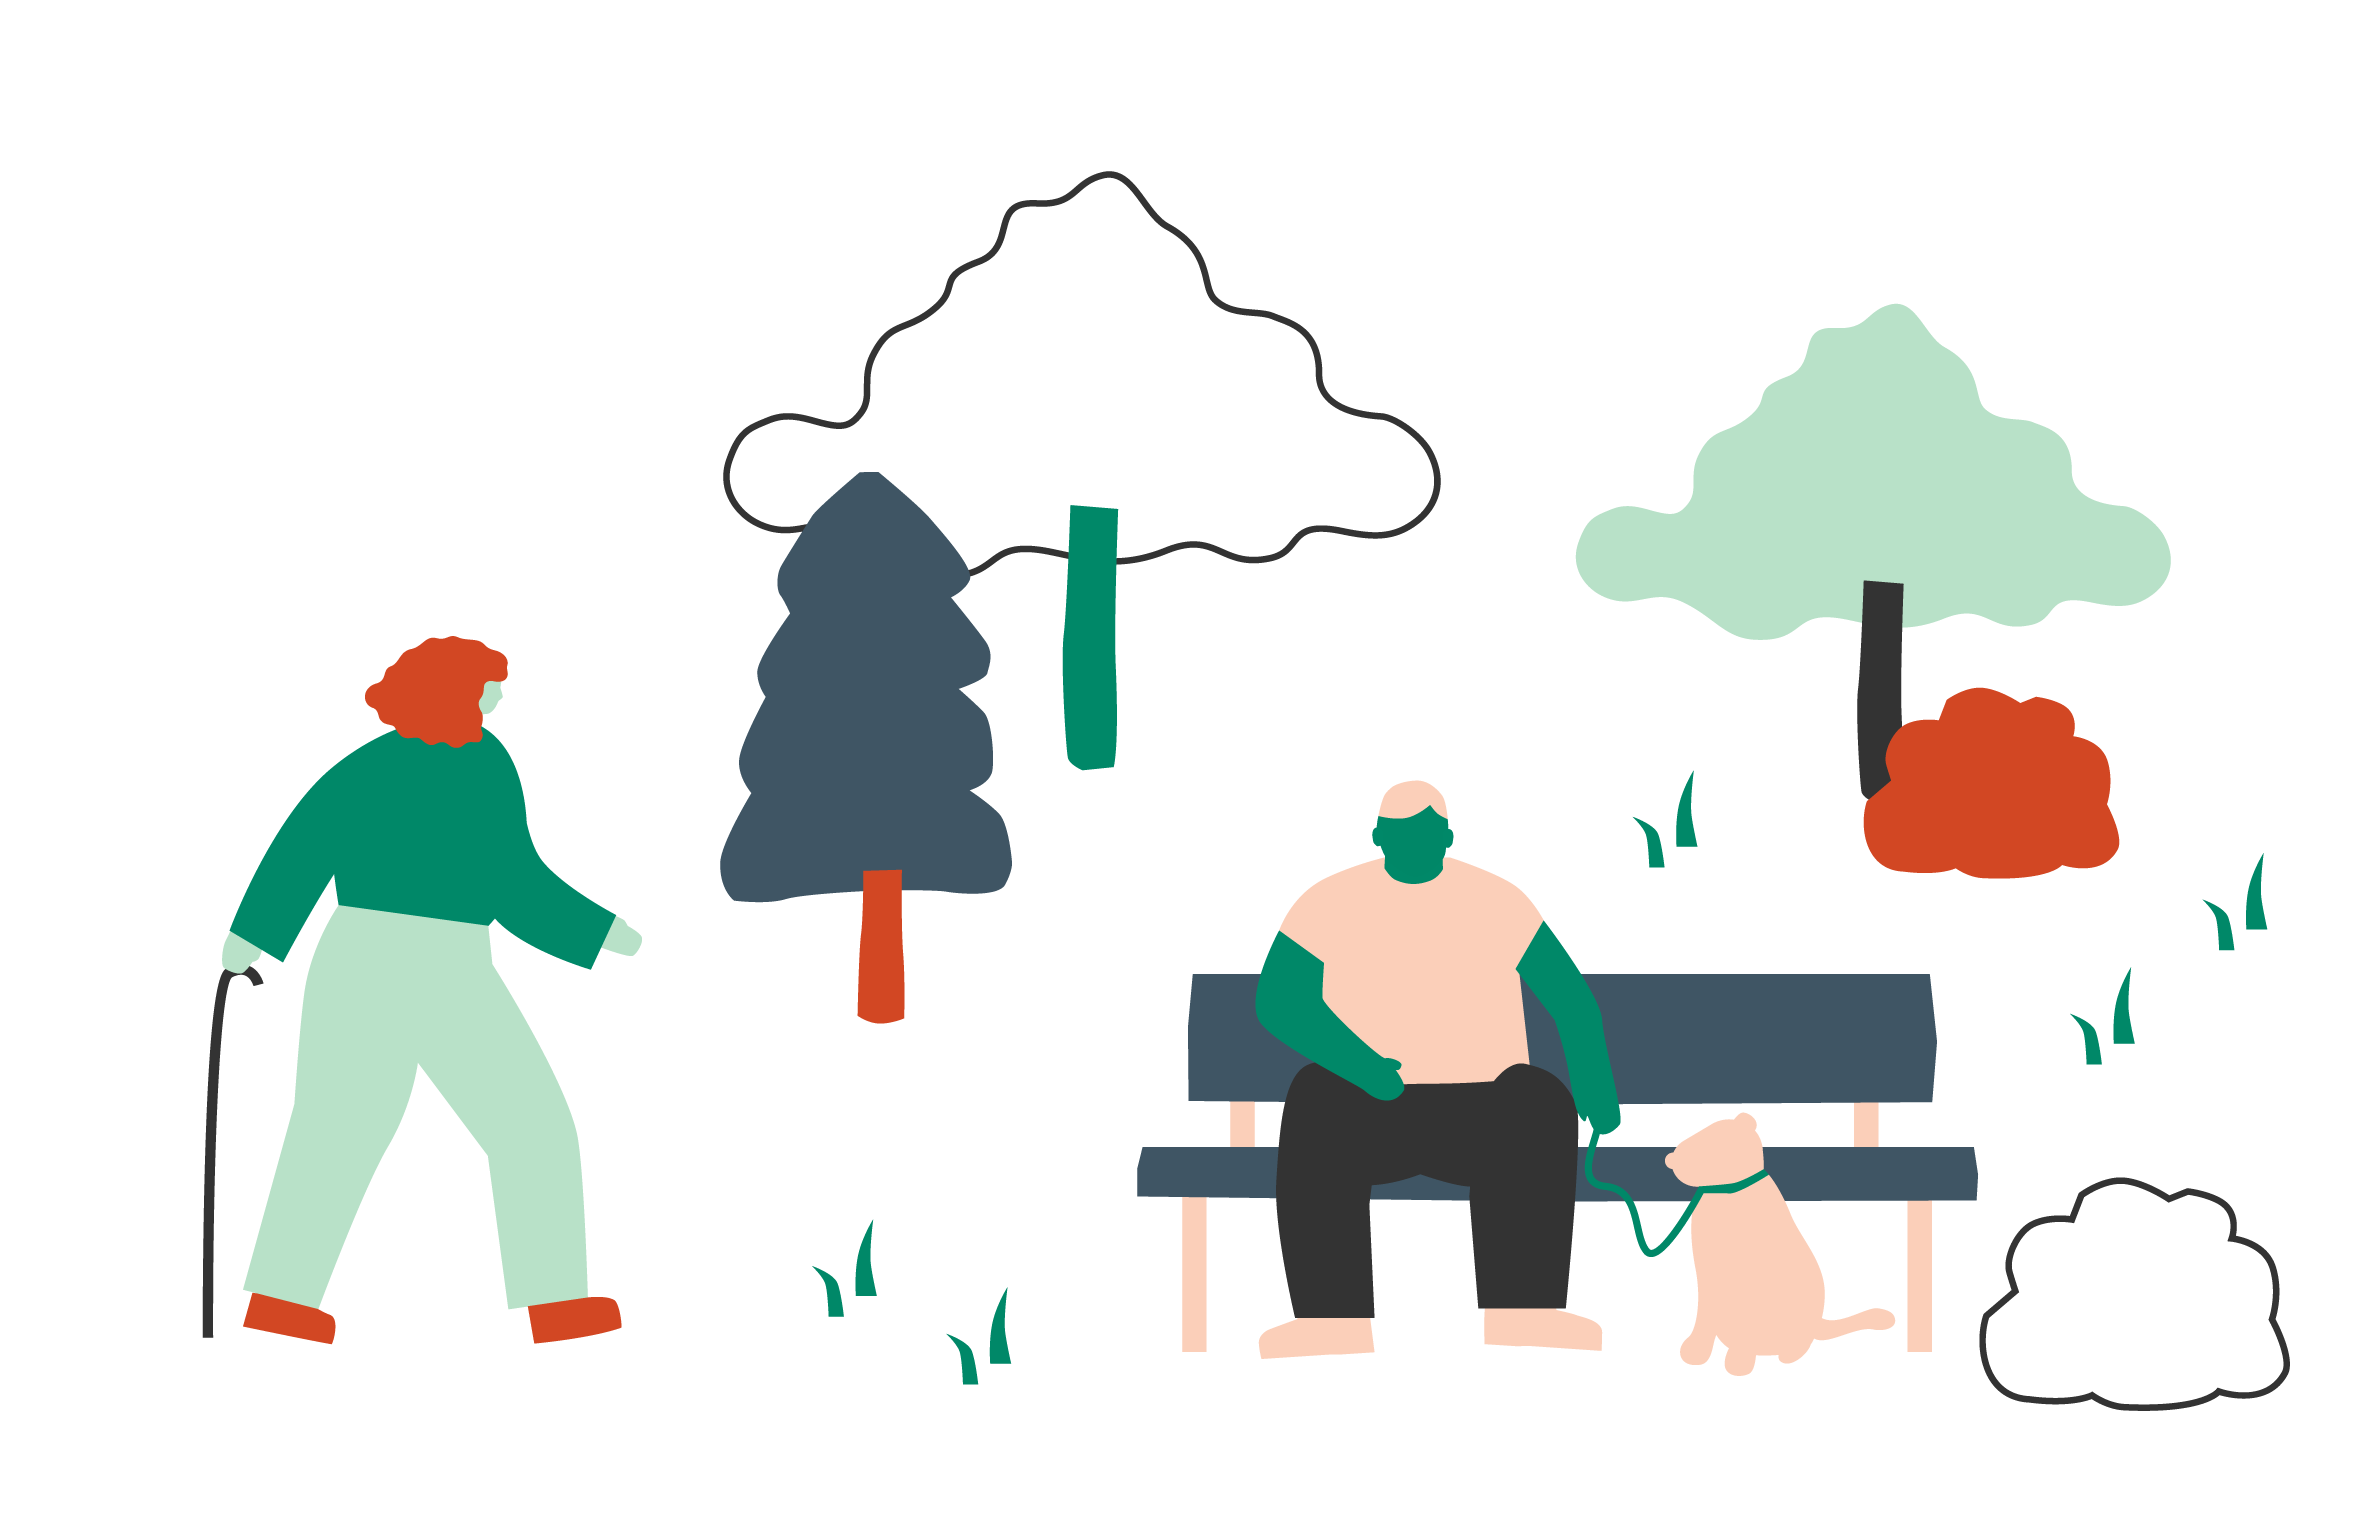 Illustration of people in a park